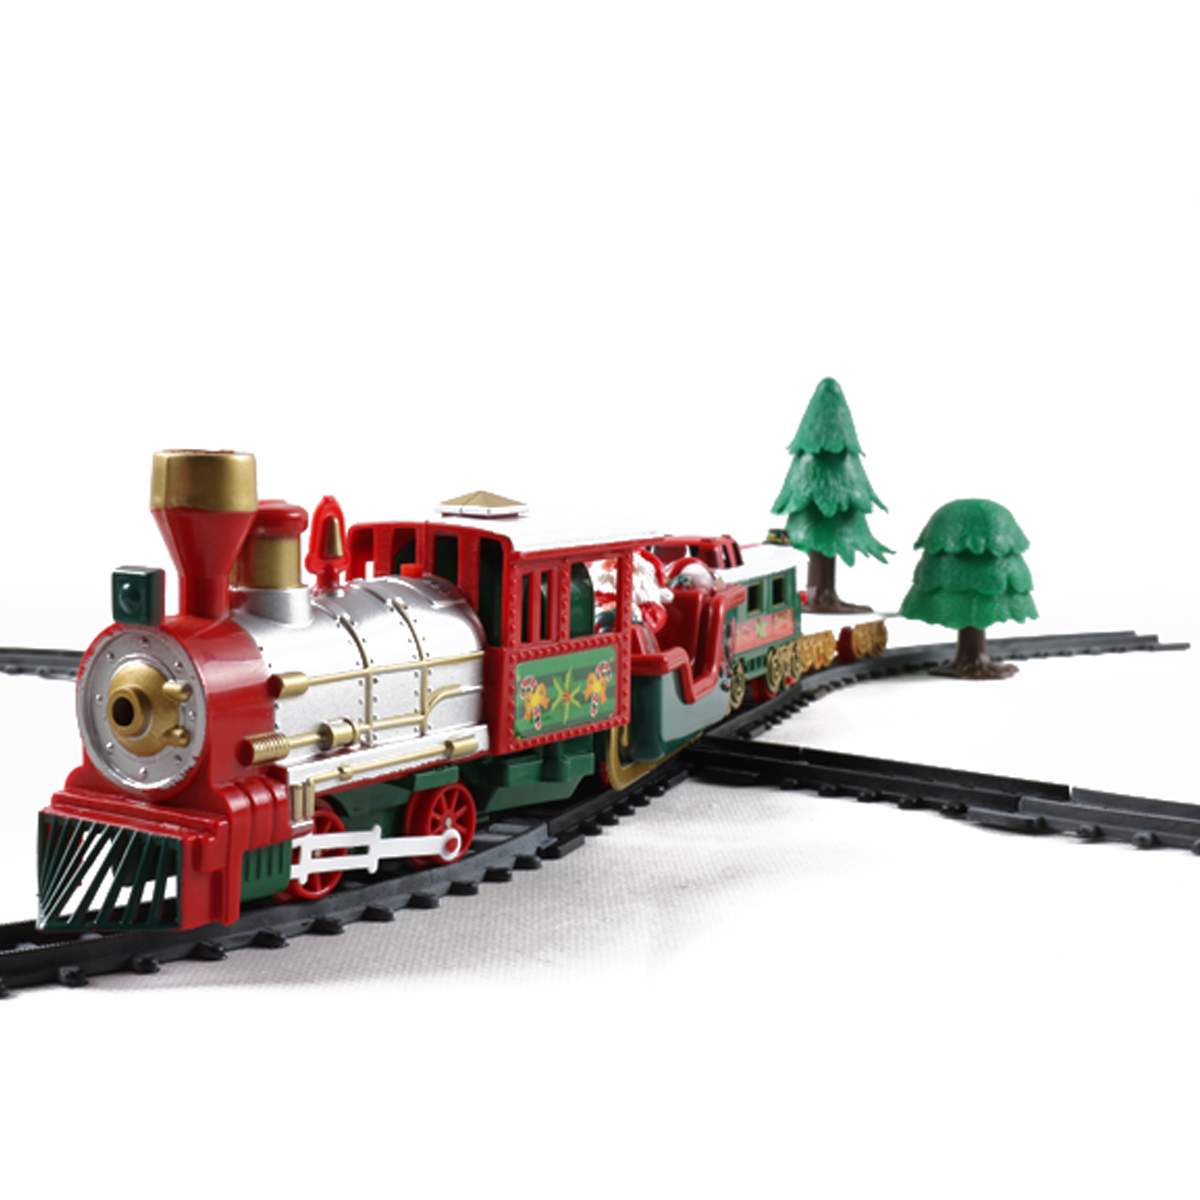 Christmas-Electric-Track-Train-With-Sound-Music-Children-Gift-Locomotive-Model-Toys-1400815